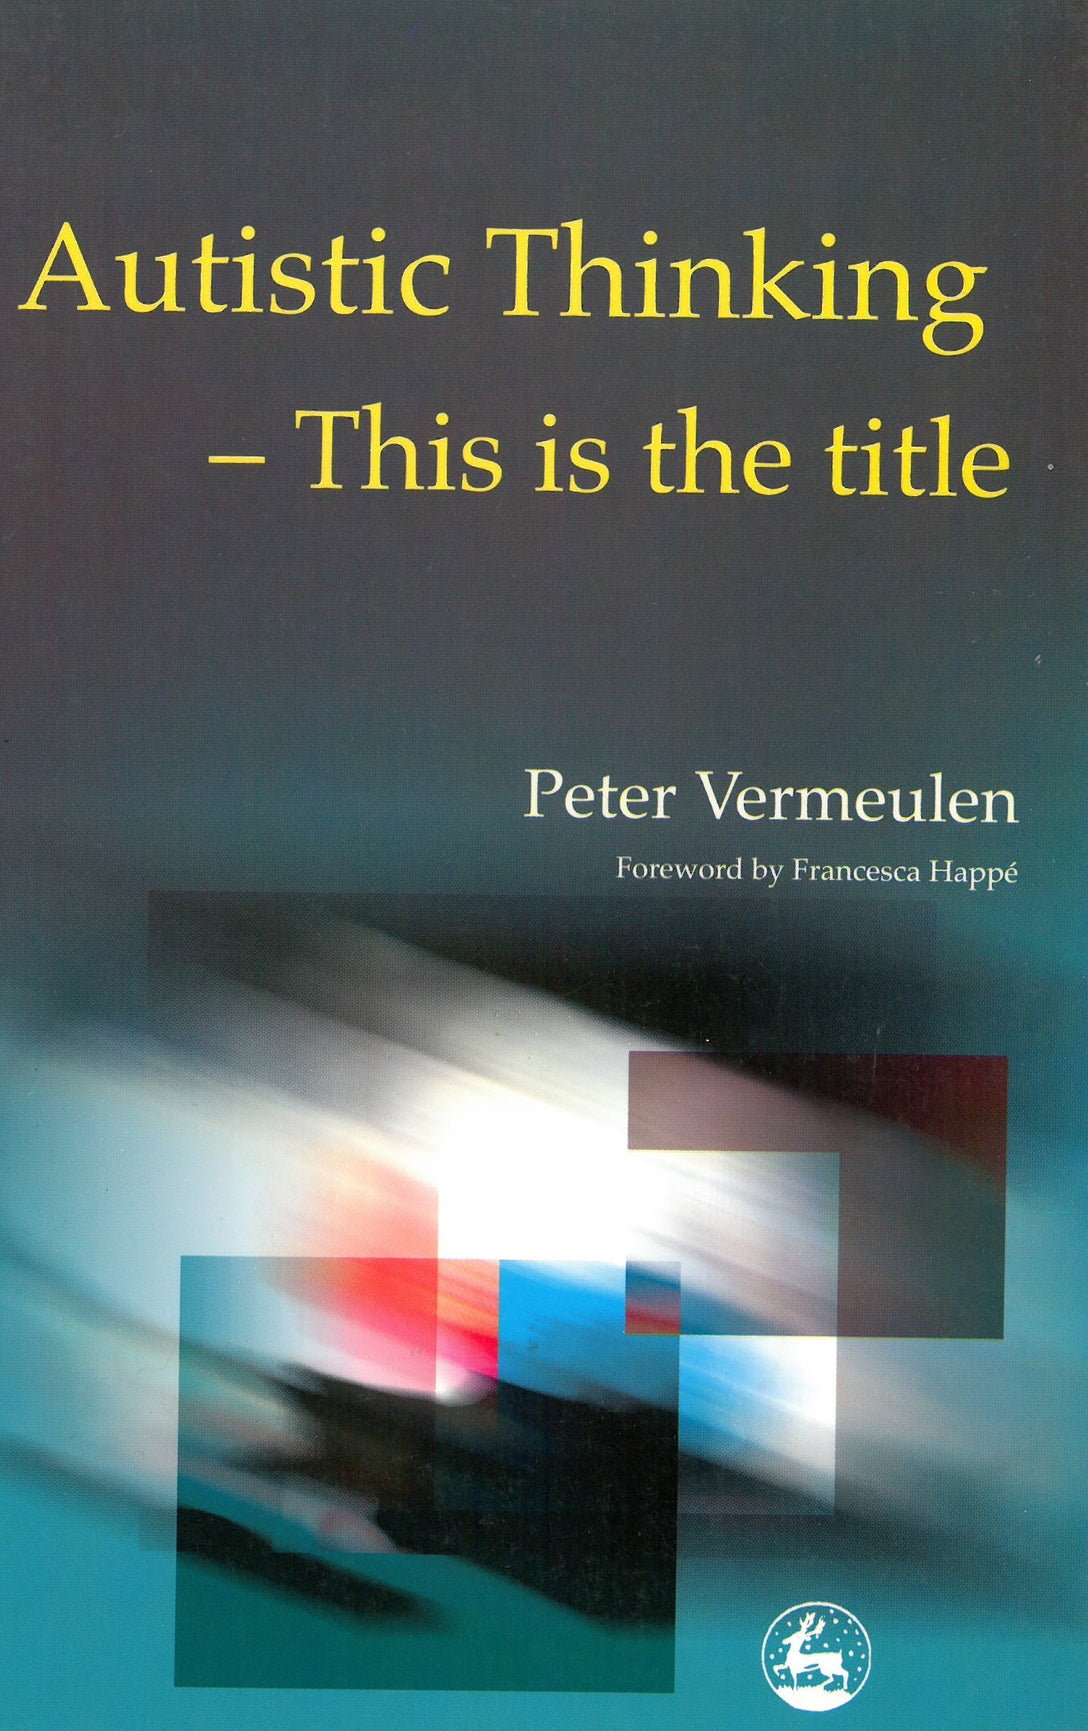 Autistic Thinking by Peter Vermeulen